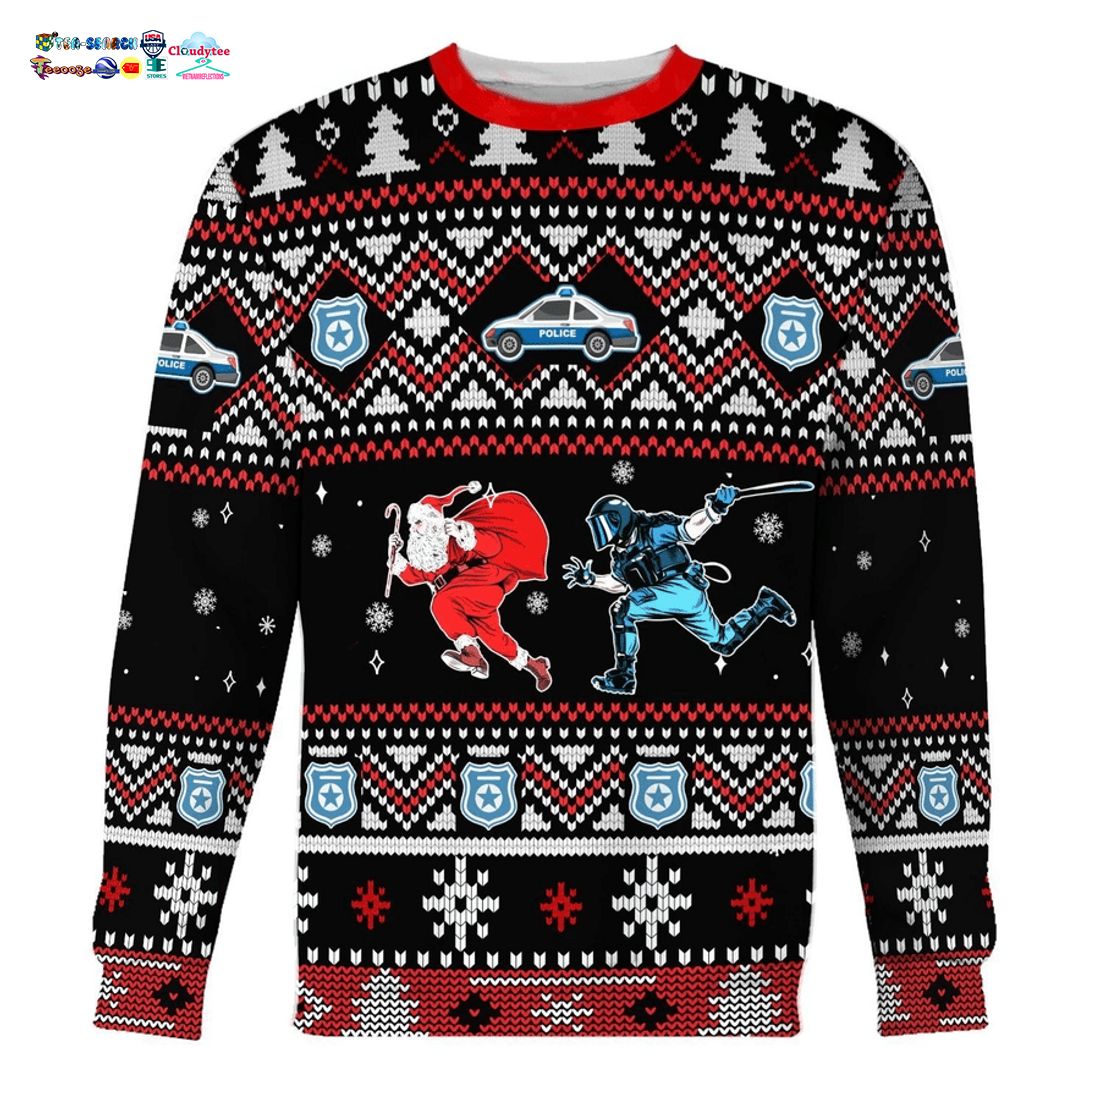 Santa Claus Riot Police Ugly Christmas Sweater